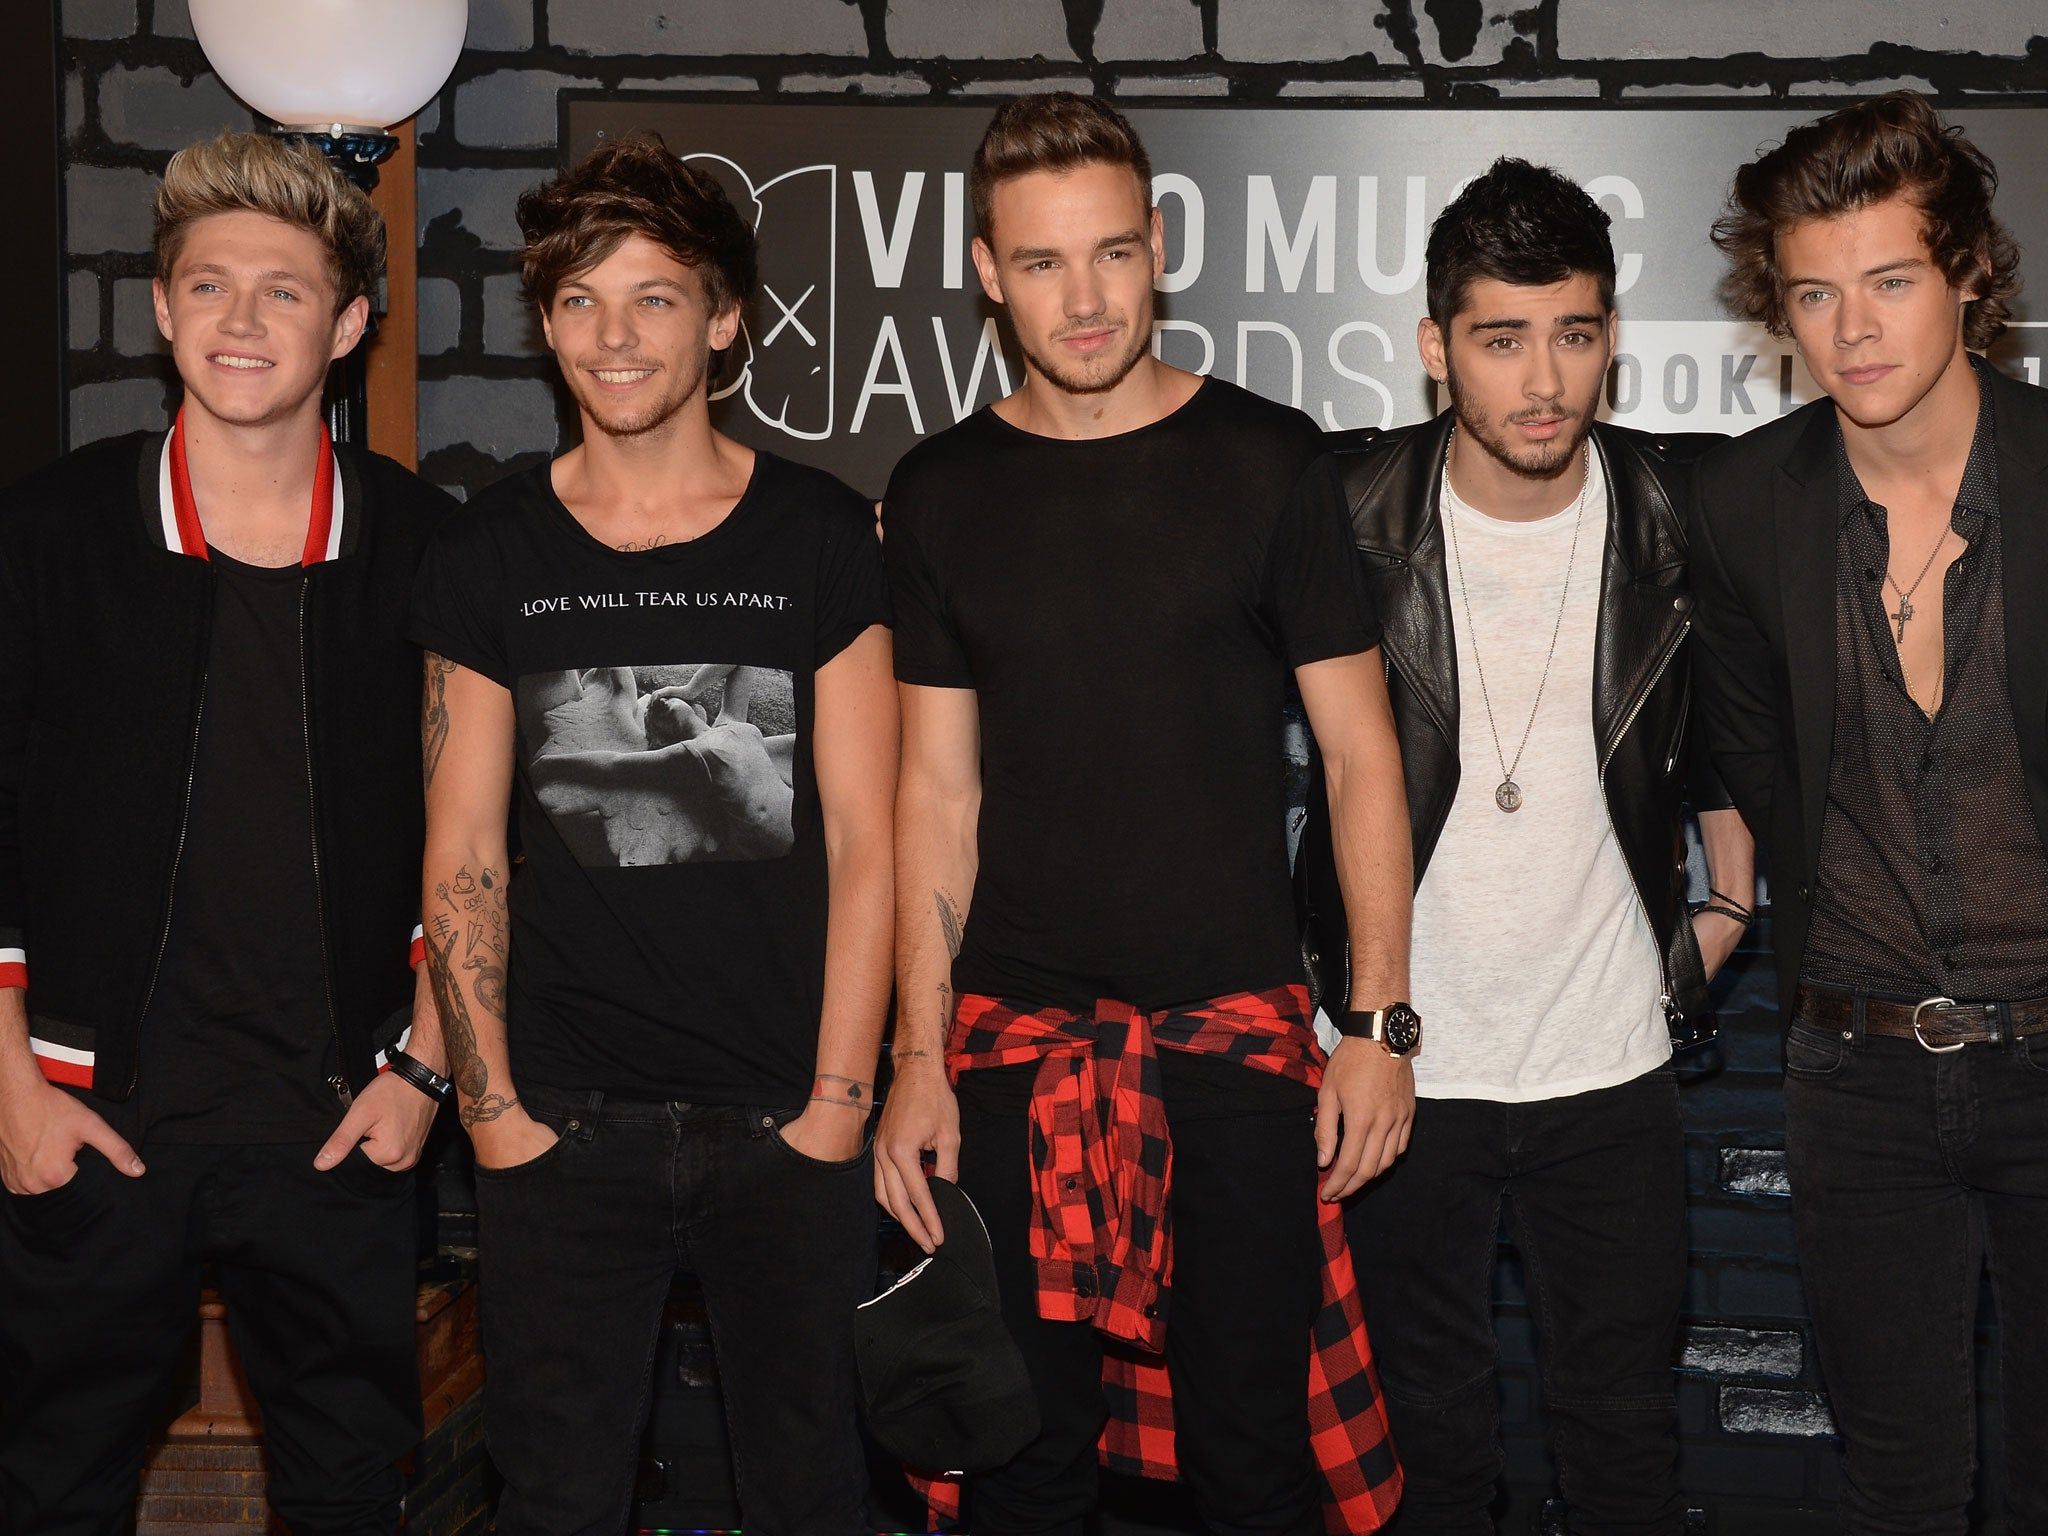 One Direction Score Fastest Selling Album Of 2013 With Midnight Memories